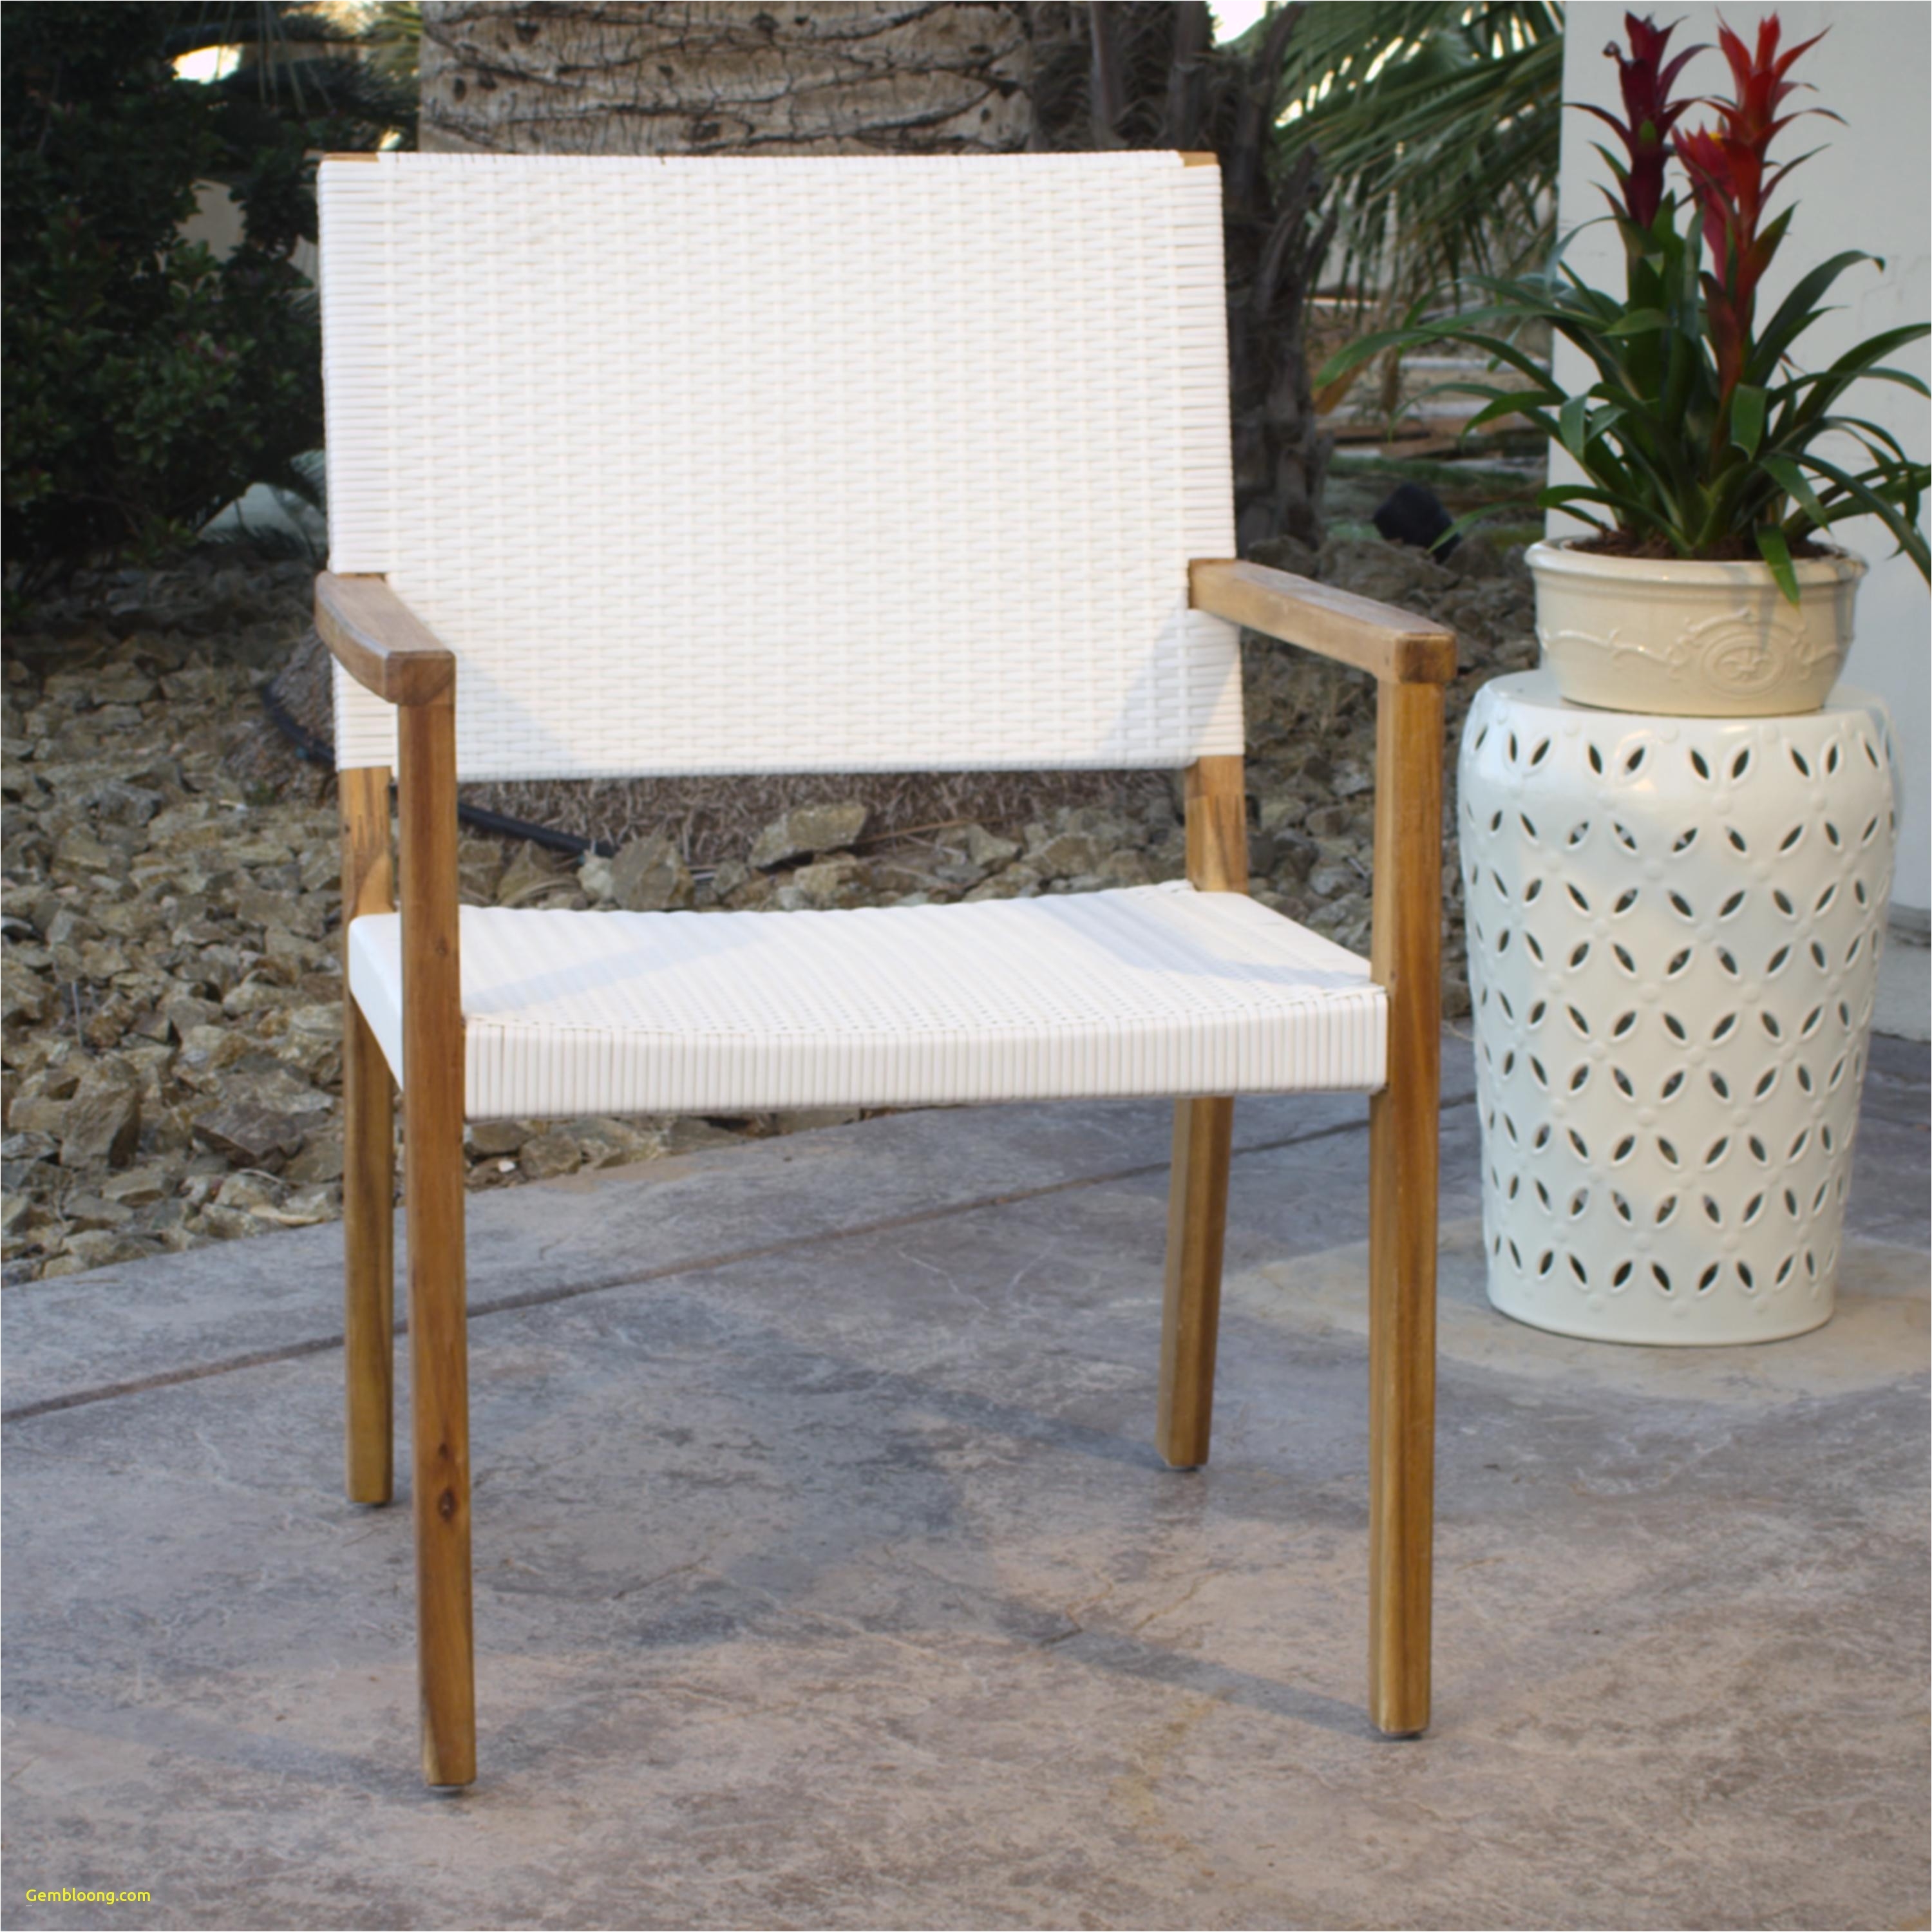 White Wooden Chairs for Rent Near Me Home Design Patio Deck Furniture Awesome Marvelous Wicker Outdoor